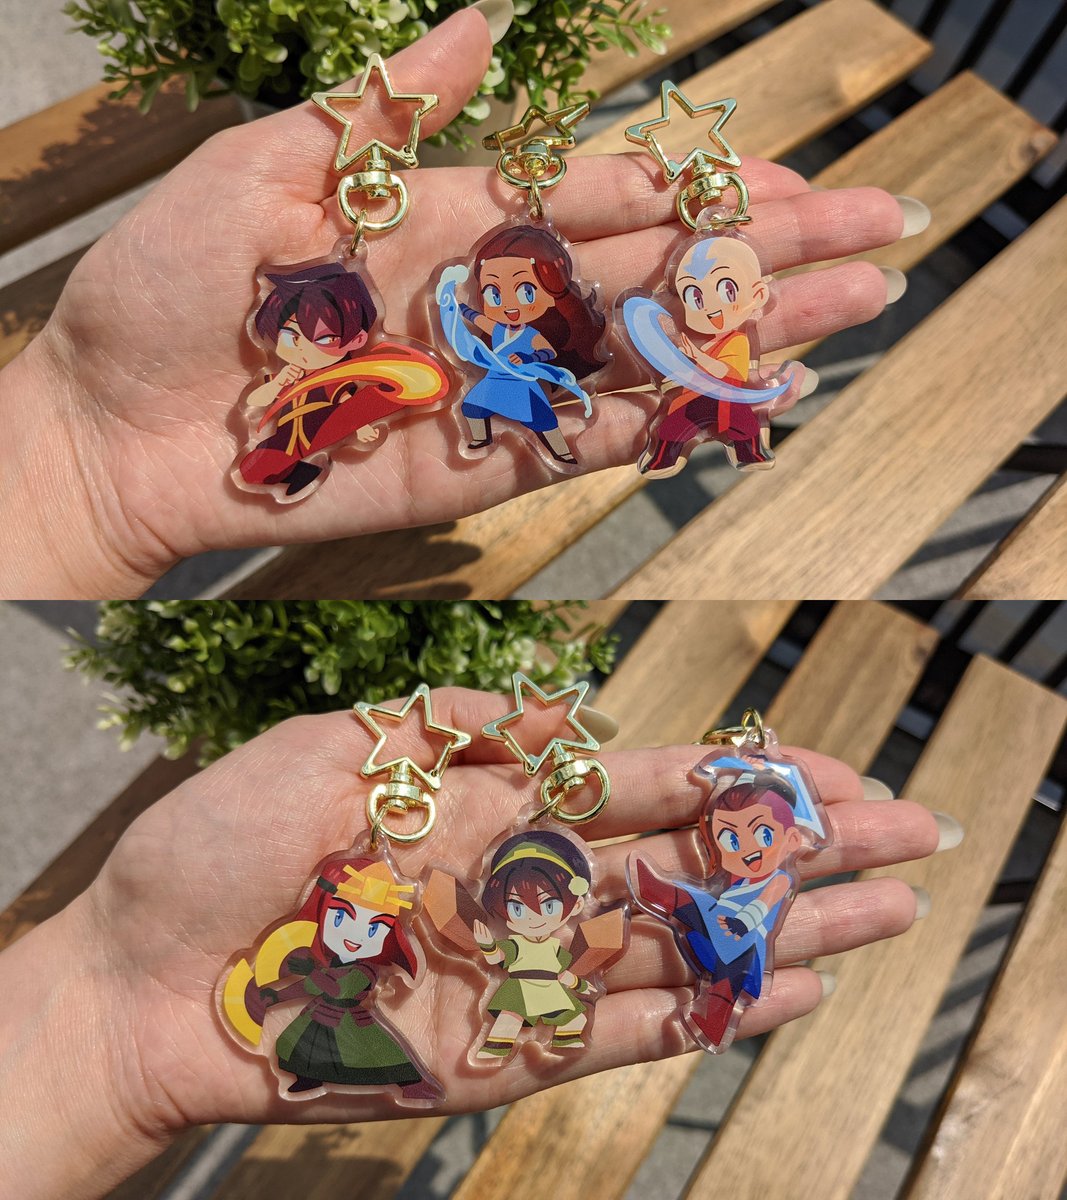 ✨💗SHOP IS NOW OPEN !!💗✨

korrasami pins and avatar charms are back in stock !!

OC merch and my usual korrasami and avatar merch are still available 💗

shop will close on March 17 at 11:59pm EST!

RTs are appreciated and shop link is below 💕 